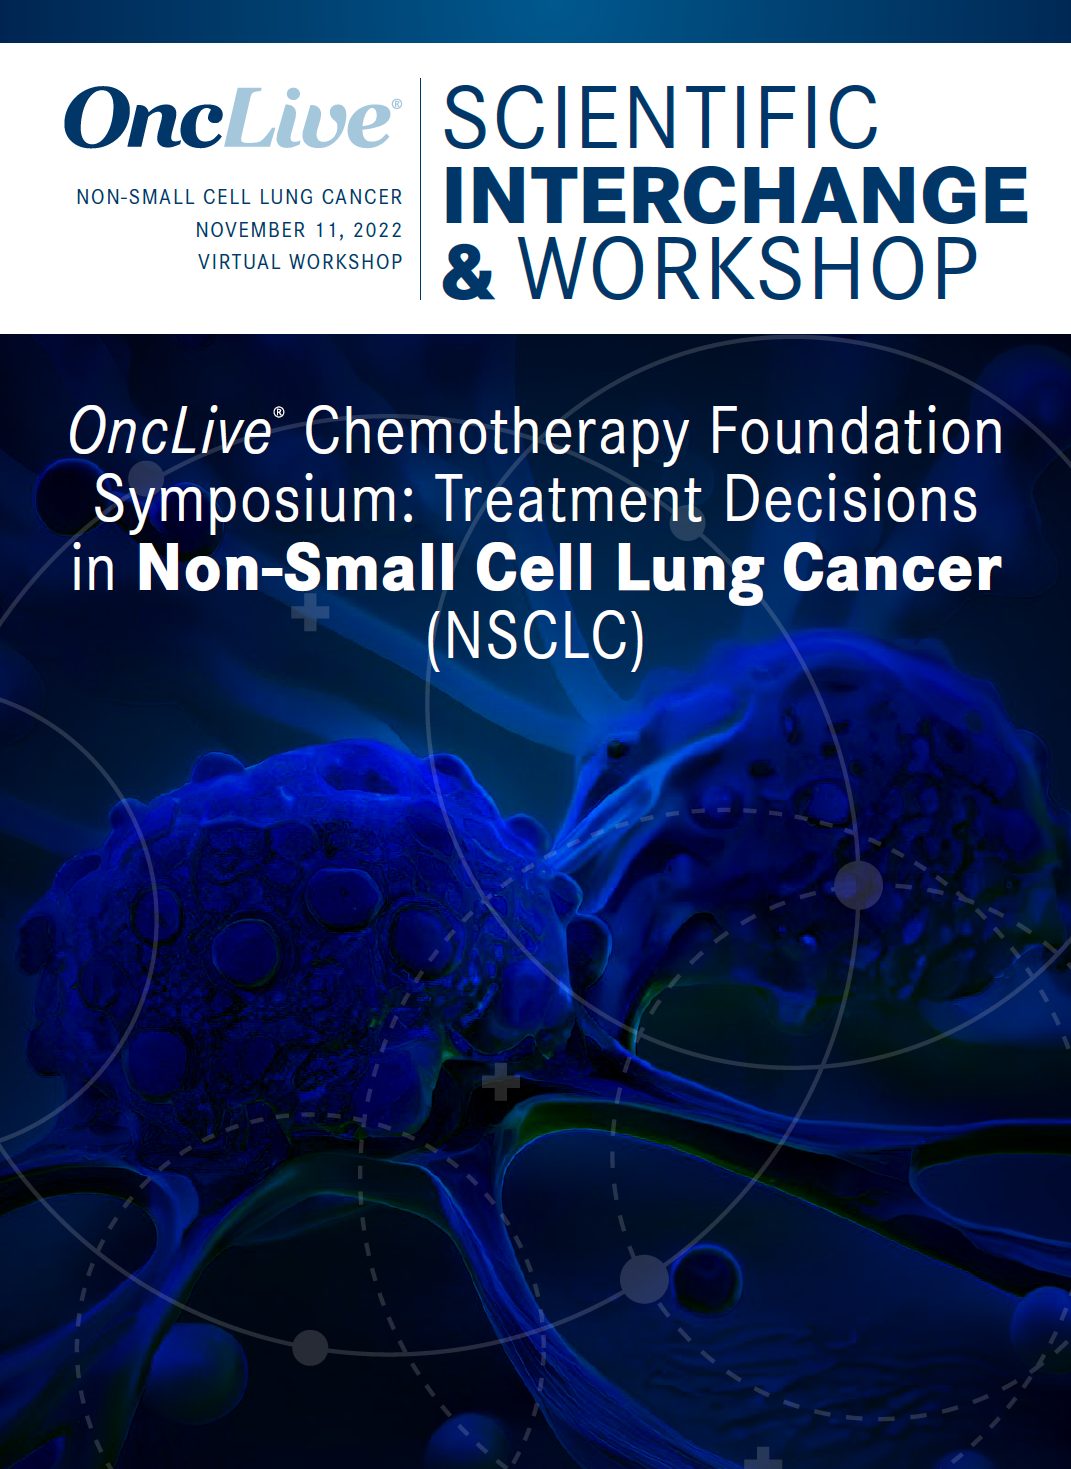 Clinical Case Scenarios: Approaches to Treatment Decisions in Non-Small Cell Lung Cancer